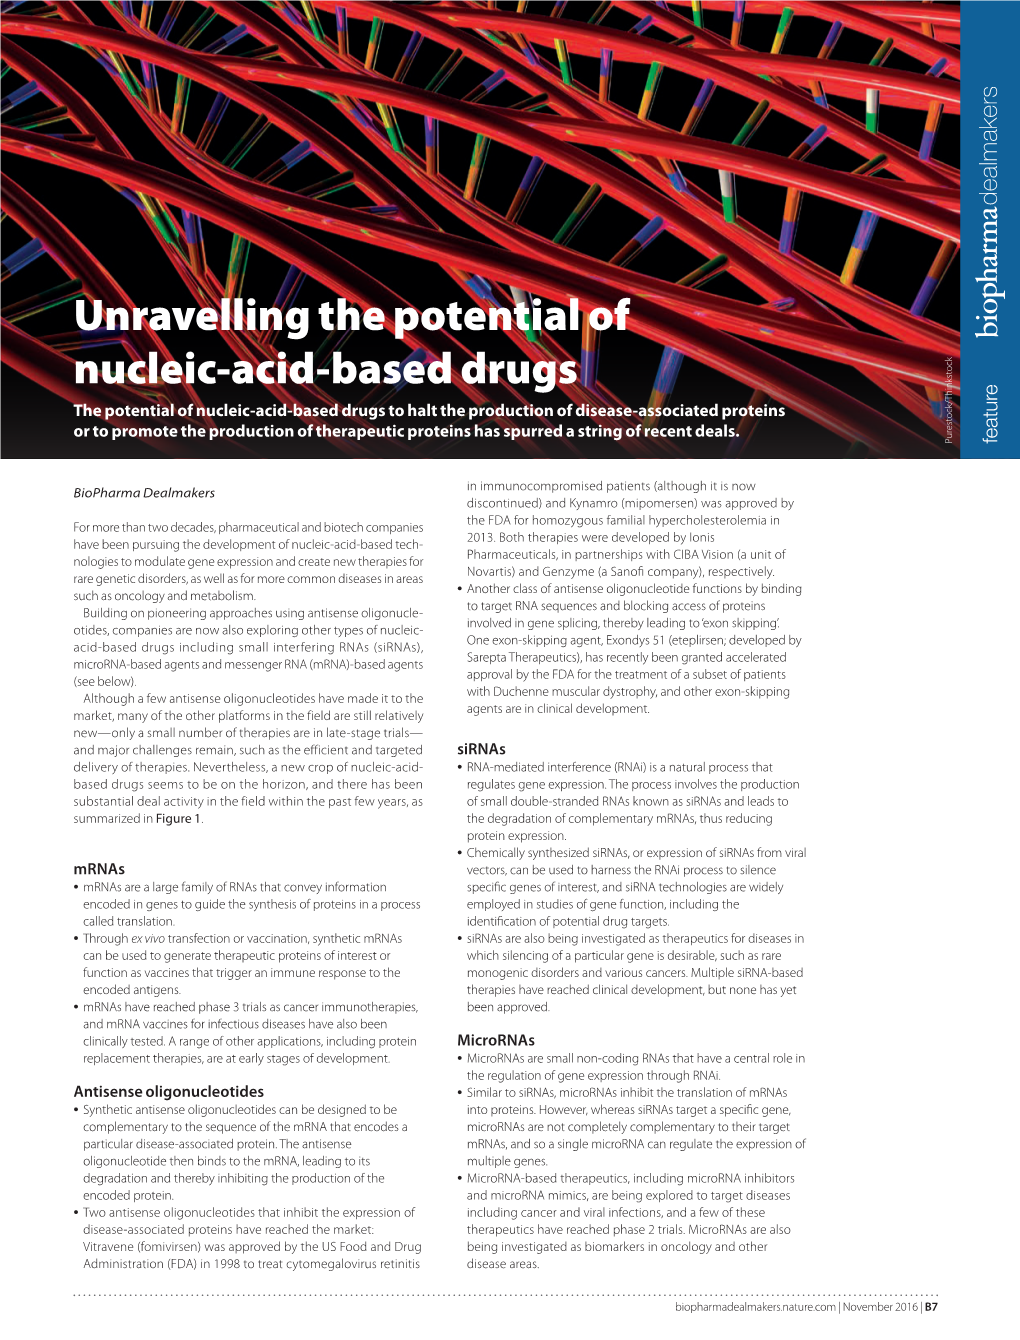 Unravelling the Potential of Nucleic-Acid-Based Drugs